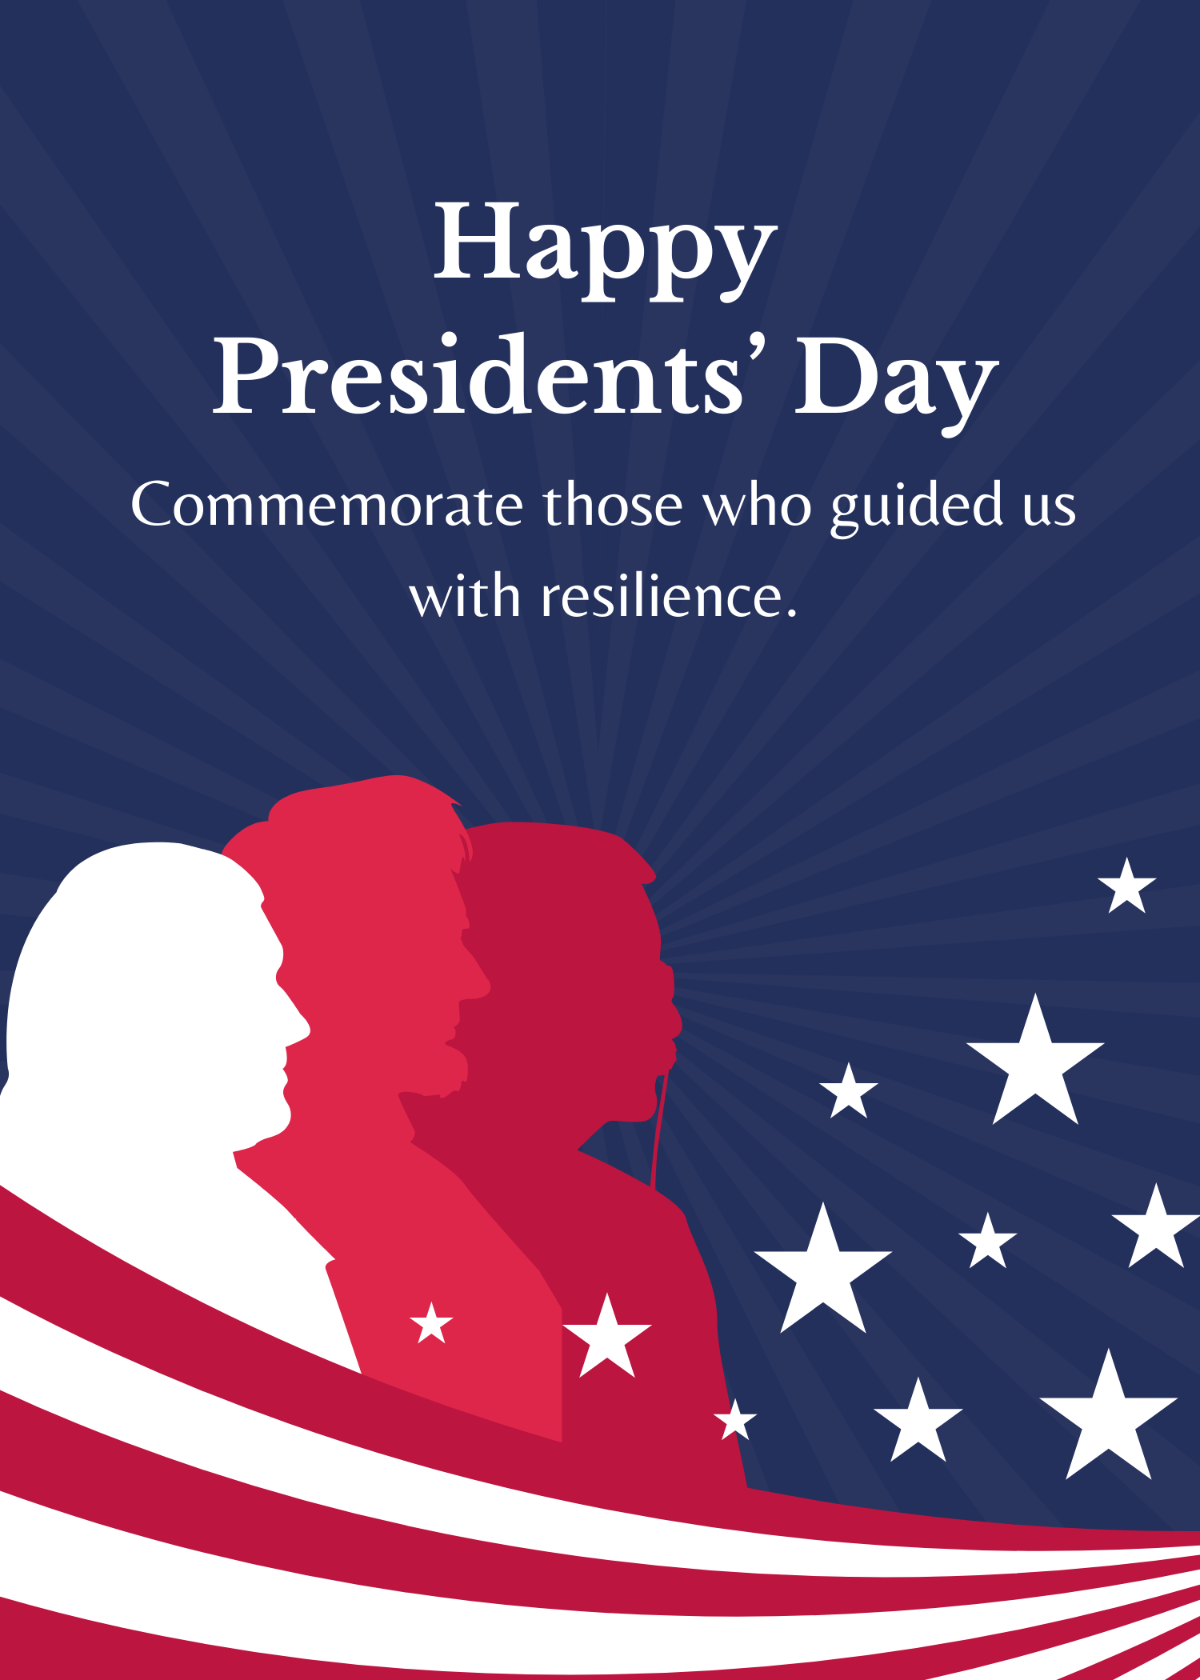 Happy President's Day Greetings